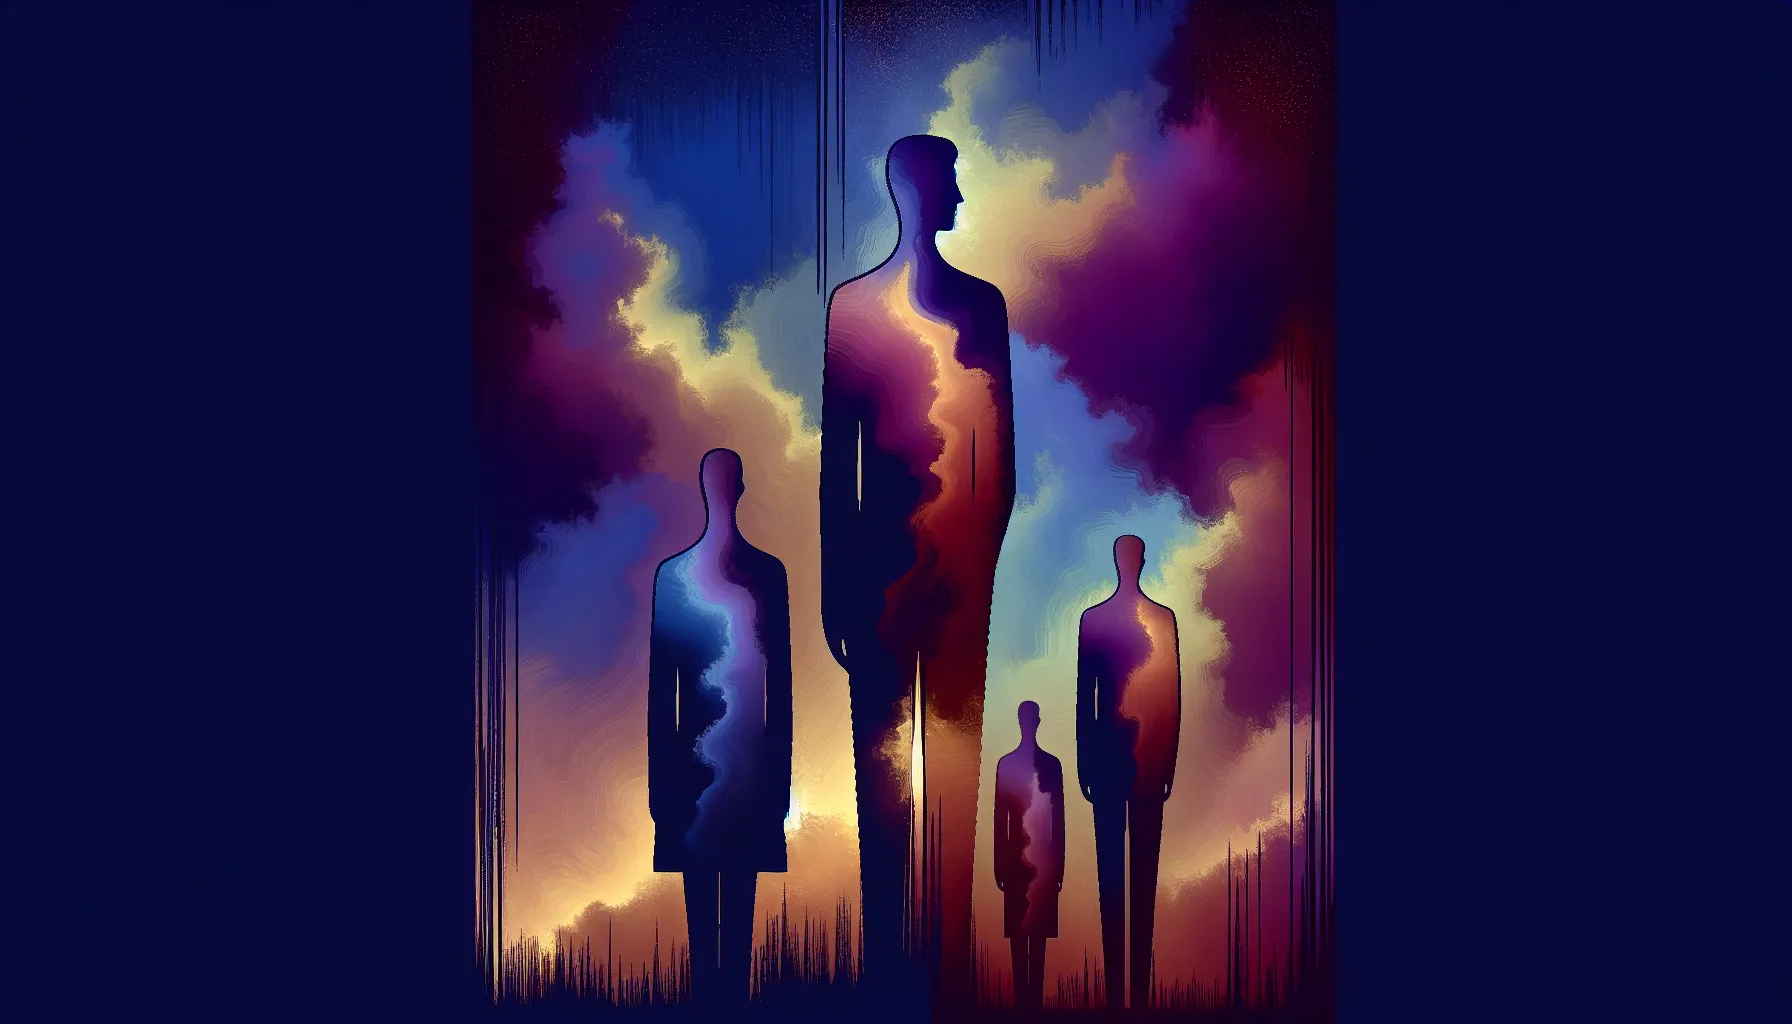 In the twilight dance of silhouettes, each figure, tall or short, plays a pivotal role in the intricate ballet of attraction. The varying heights, bathed in a celestial glow, remind us that the allure of stature intertwines with the essence of personal worth and the enigmatic forces of desire.